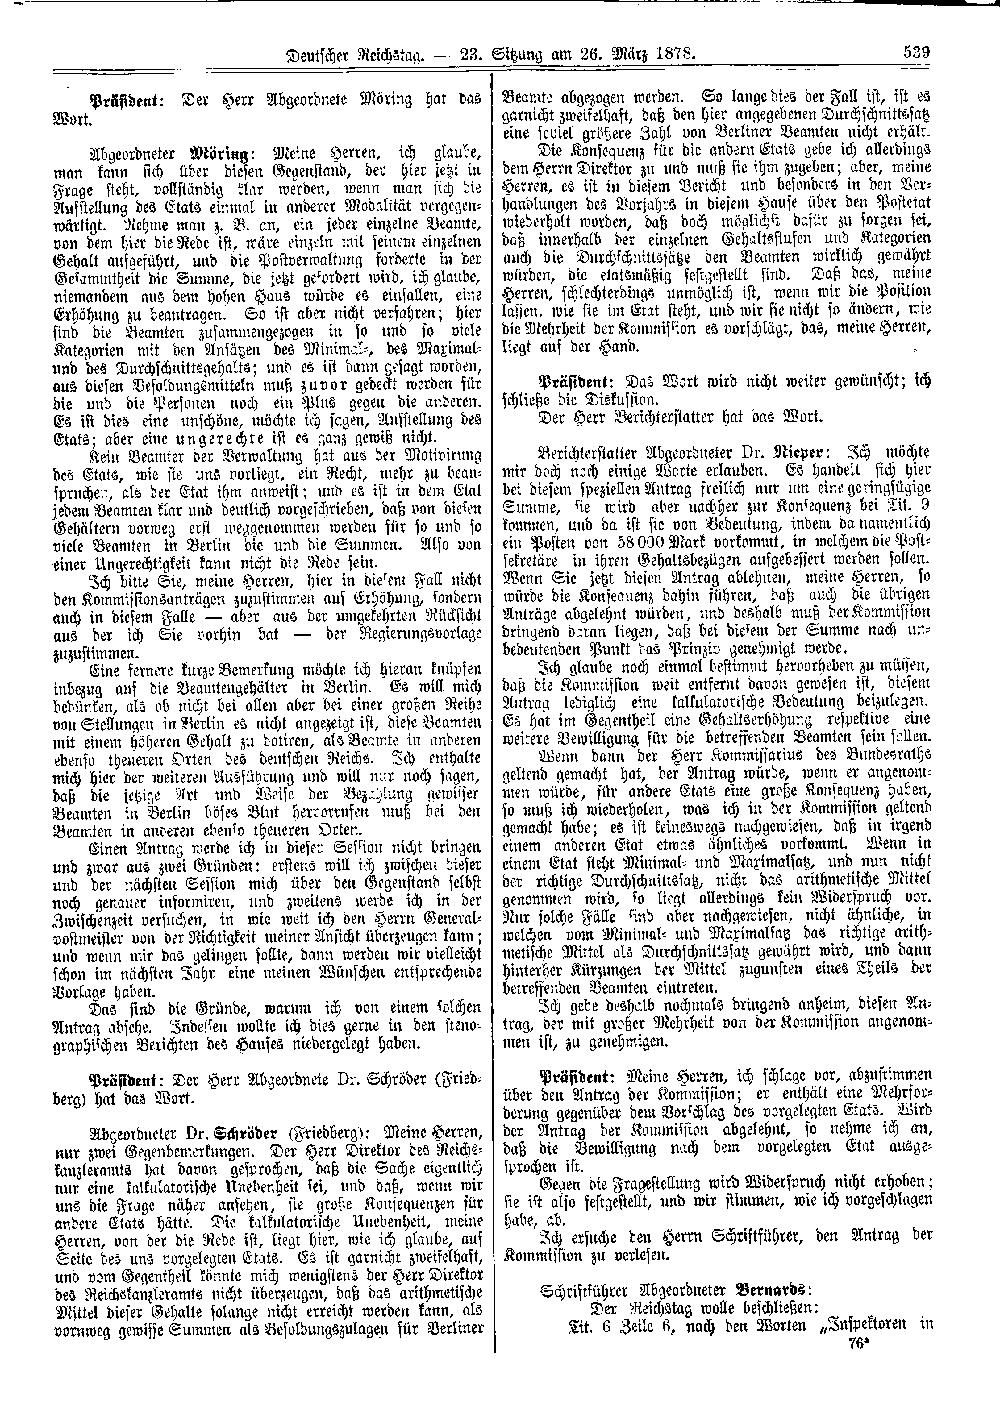 Scan of page 539